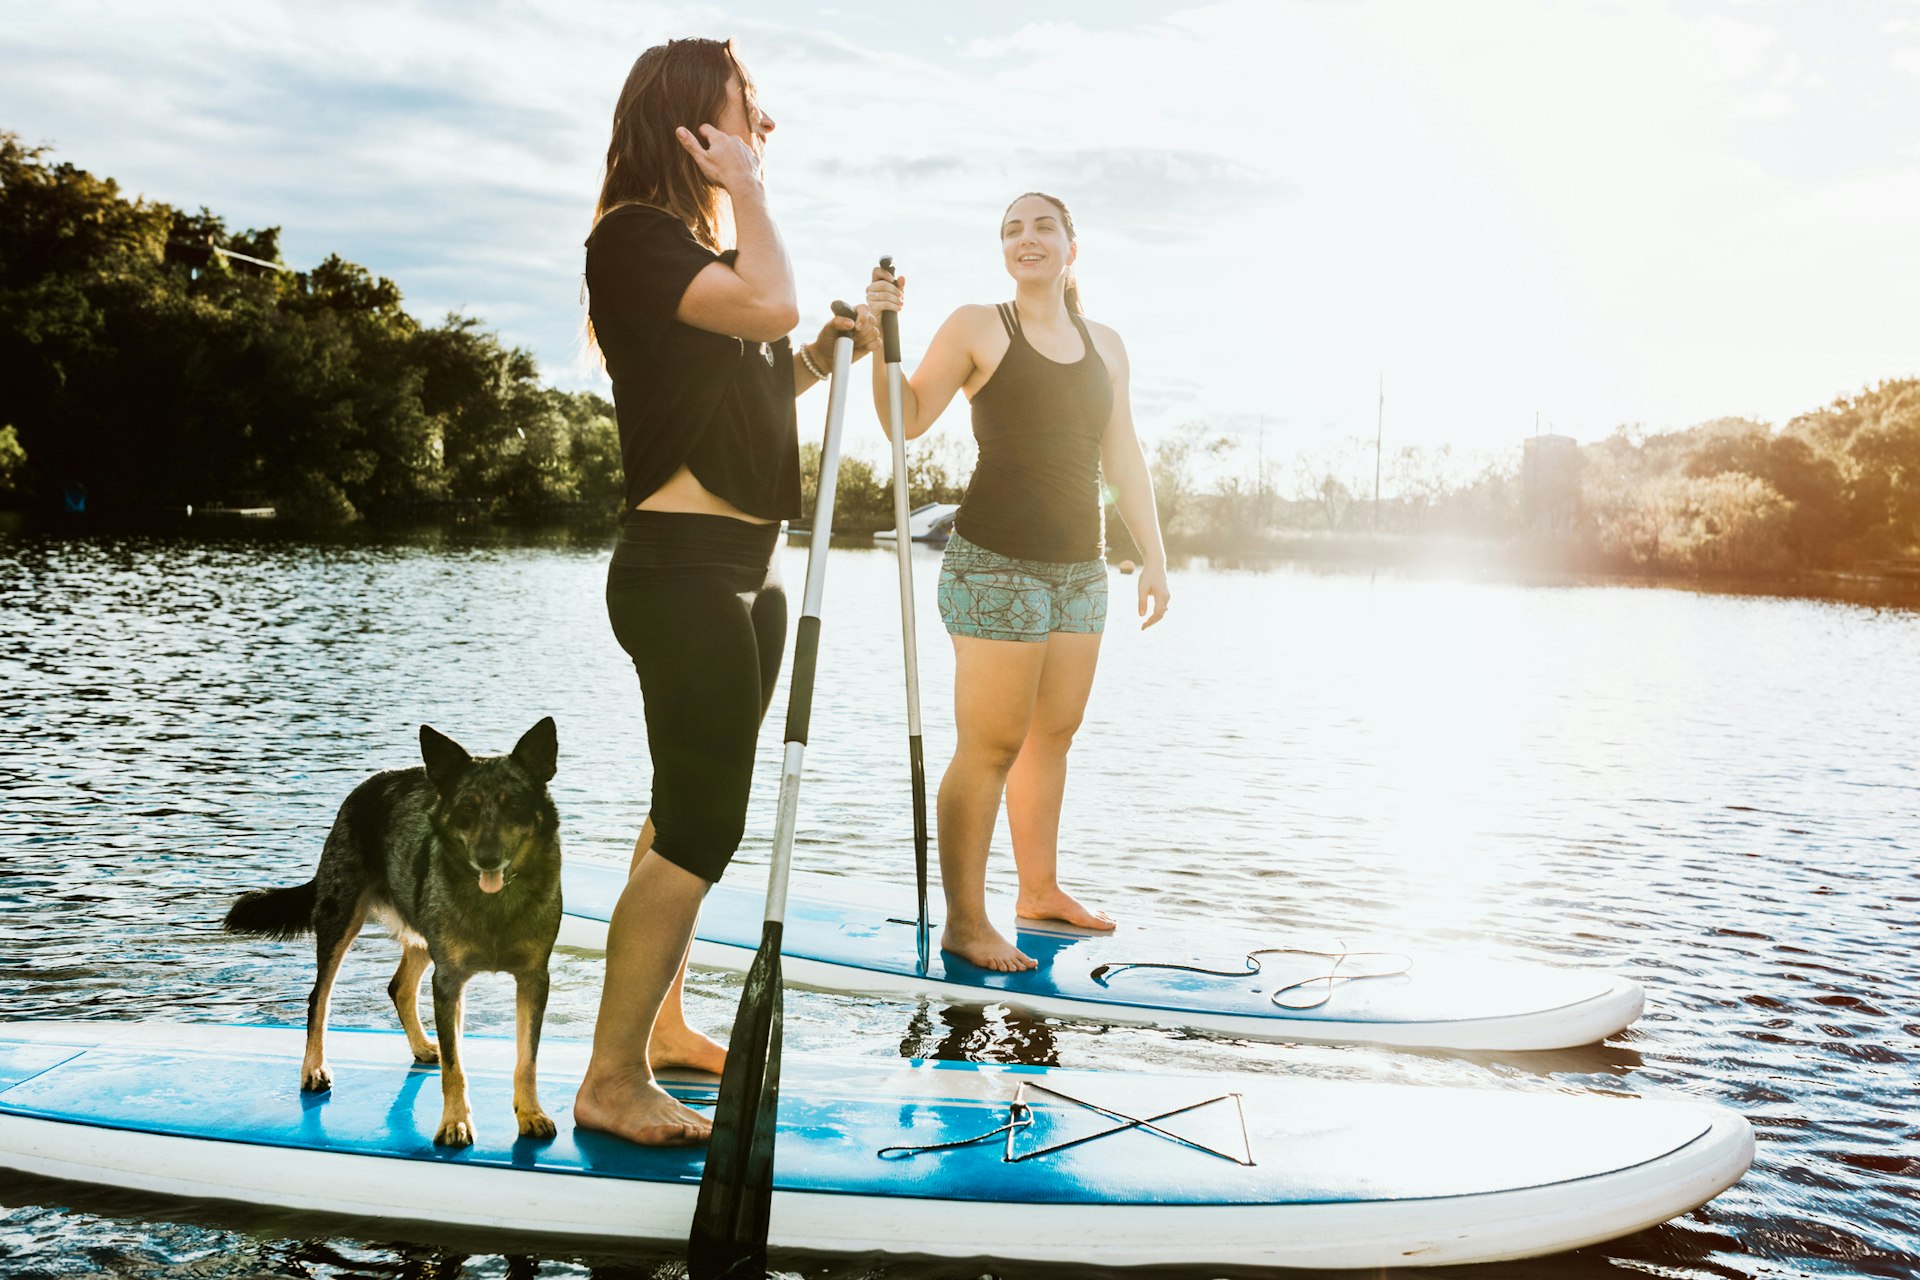 Two young women friends enjoys a peaceful moment on the water with paddle boards and a pet dog.  The sun illuminates the scene, casting a golden glow, in Austin, Texas